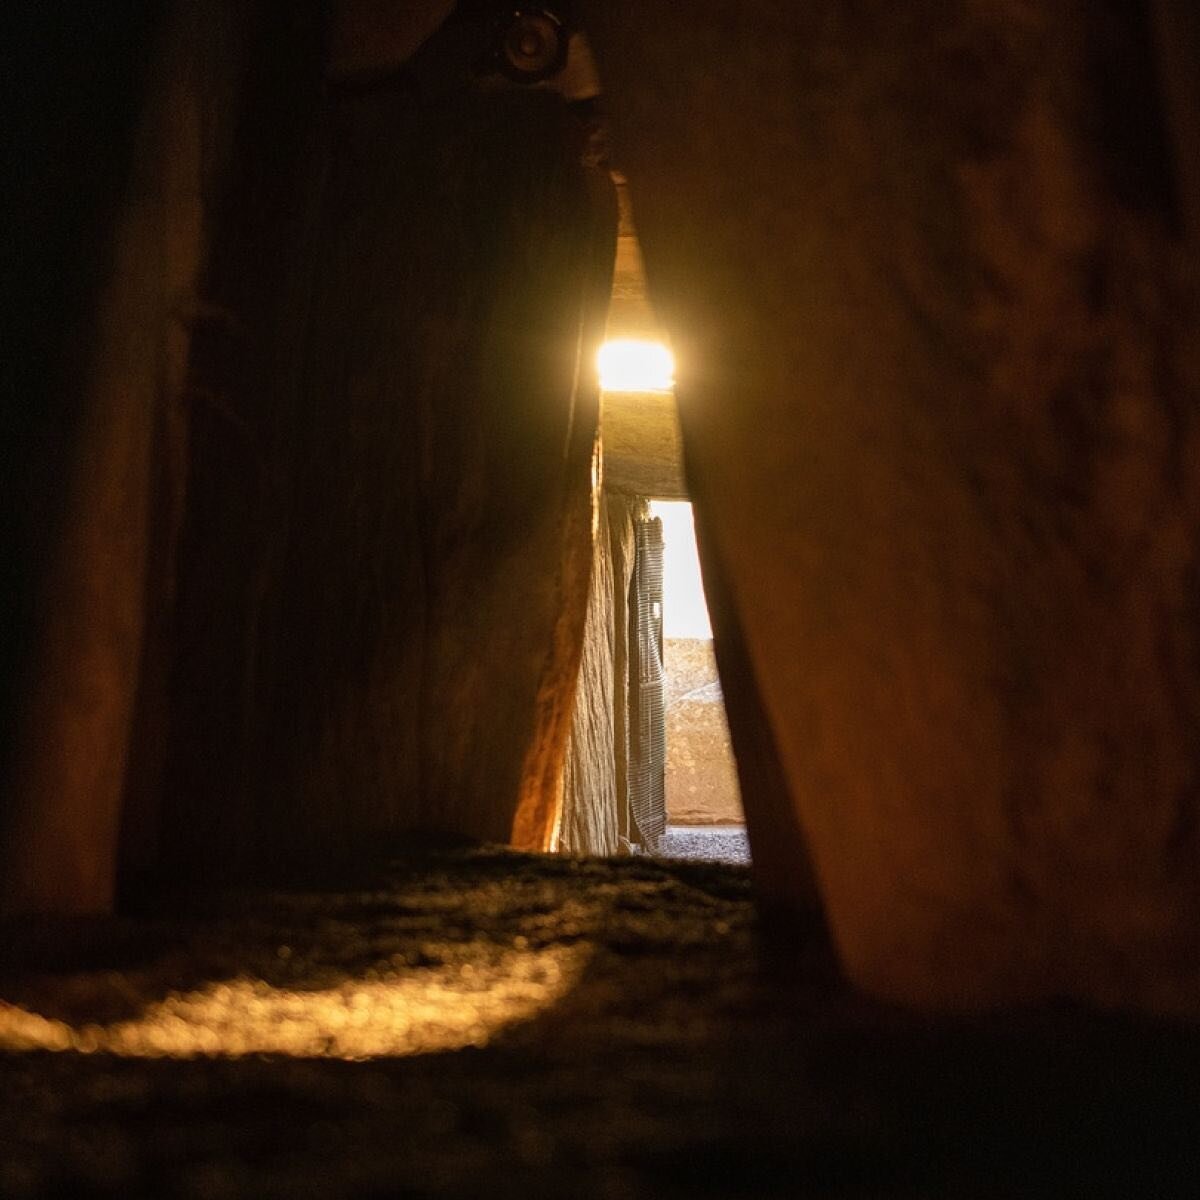 Happy Solstice! Here are some shots taken from Newgrange, in Ireland- a passage tomb built to align with the sunrise on the winter solstice. It&rsquo;s beautifully symbolic that on the shortest day of the year (outwardly, the day with the least sunli